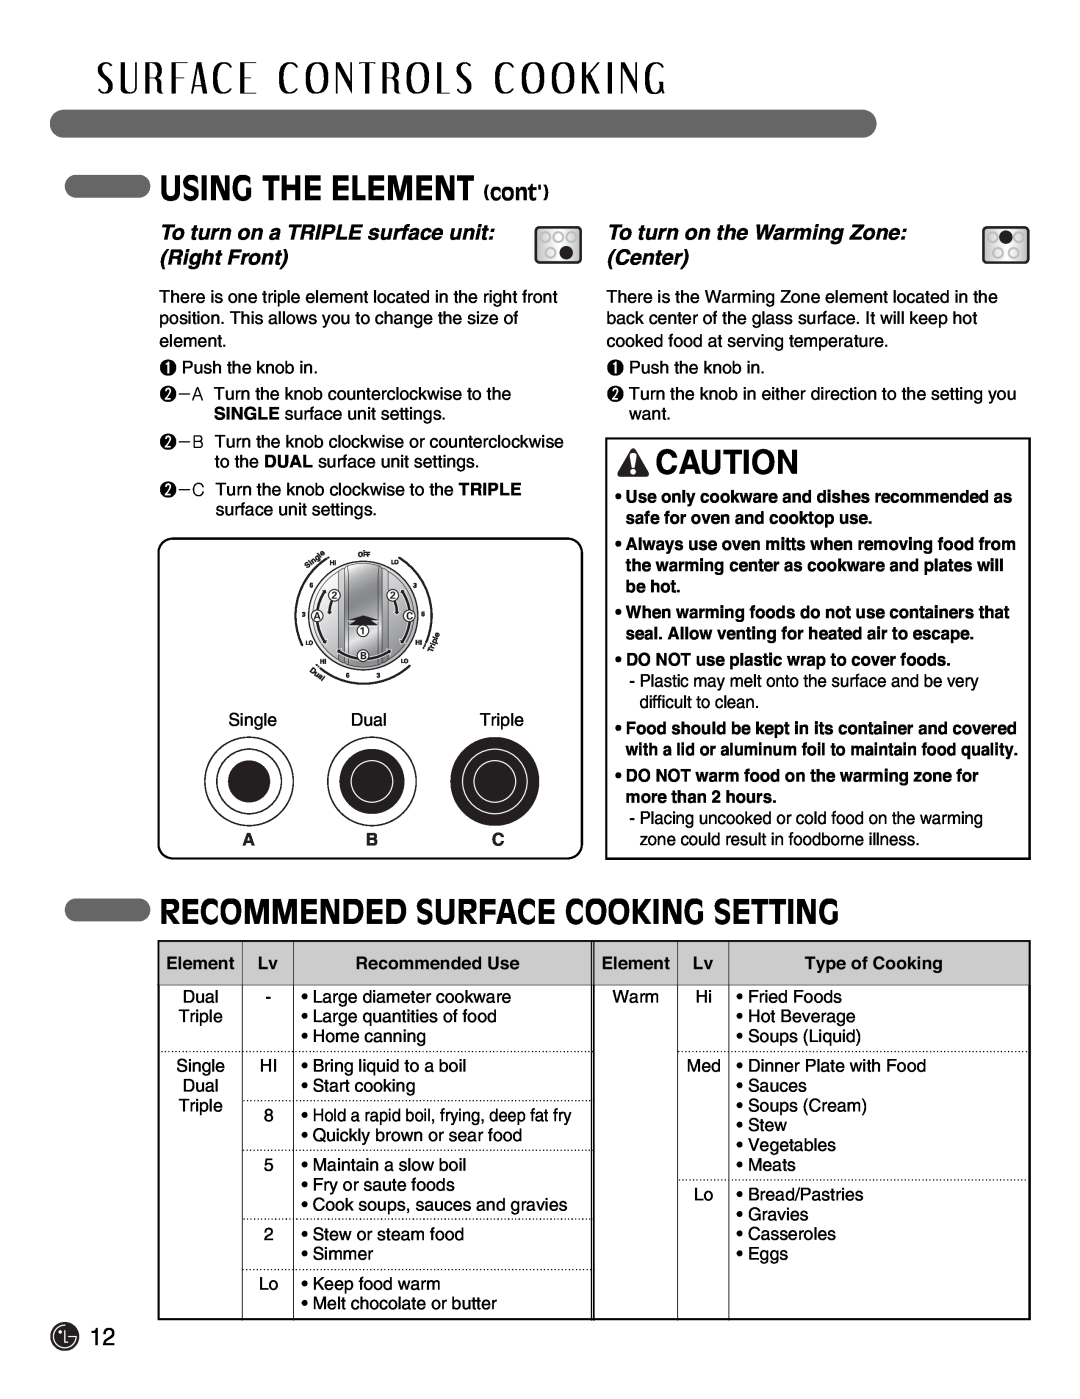 LG Electronics LSE3092ST USING THE ELEMENT cont, Recommended Surface Cooking Setting, To turn on the Warming Zone Center 